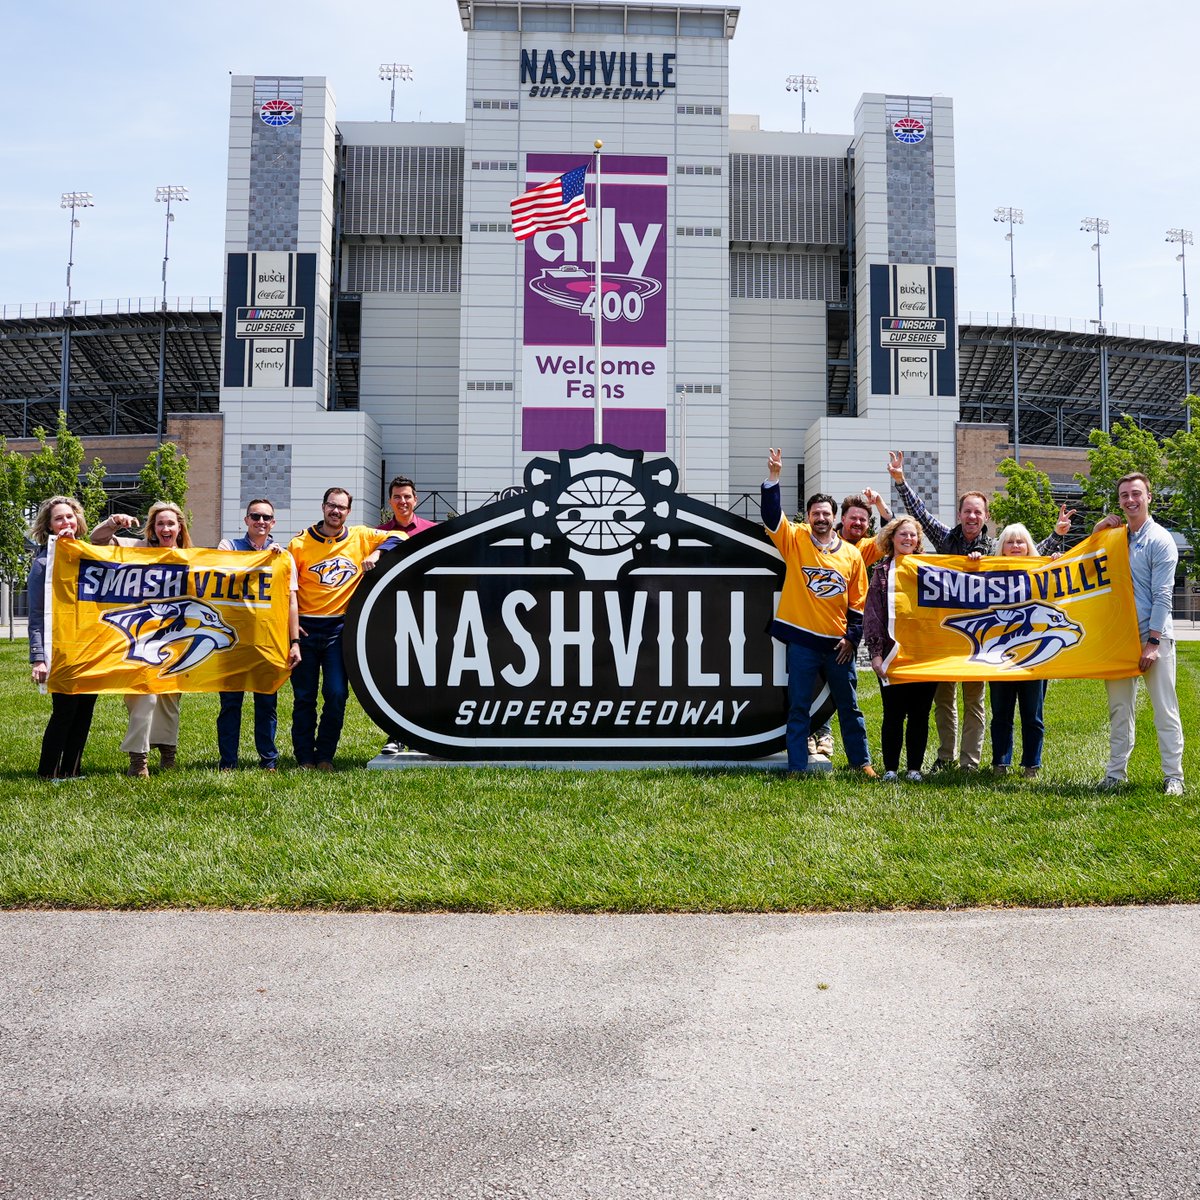 Sending good luck to our friends at the Preds as they SMASH the playoffs! 💛 #GuitarsAndFastCars | #SMASHVILLE